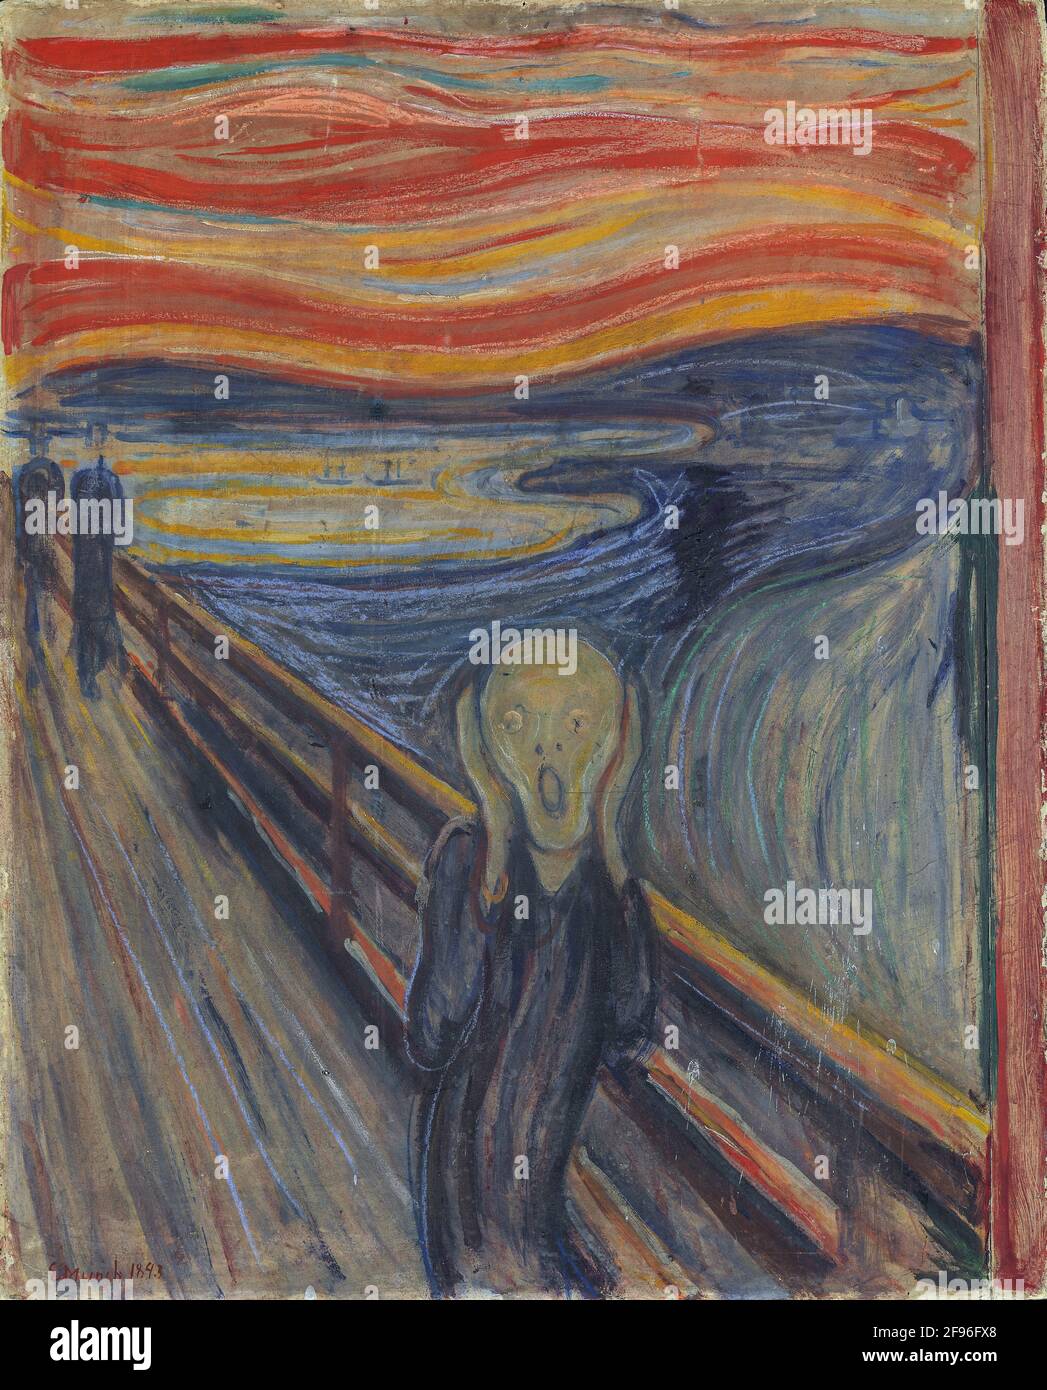 Edvard Munch, 1893, The Scream, oil, tempera and pastel on cardboard, Oslo, National Gallery of Norway Stock Photo